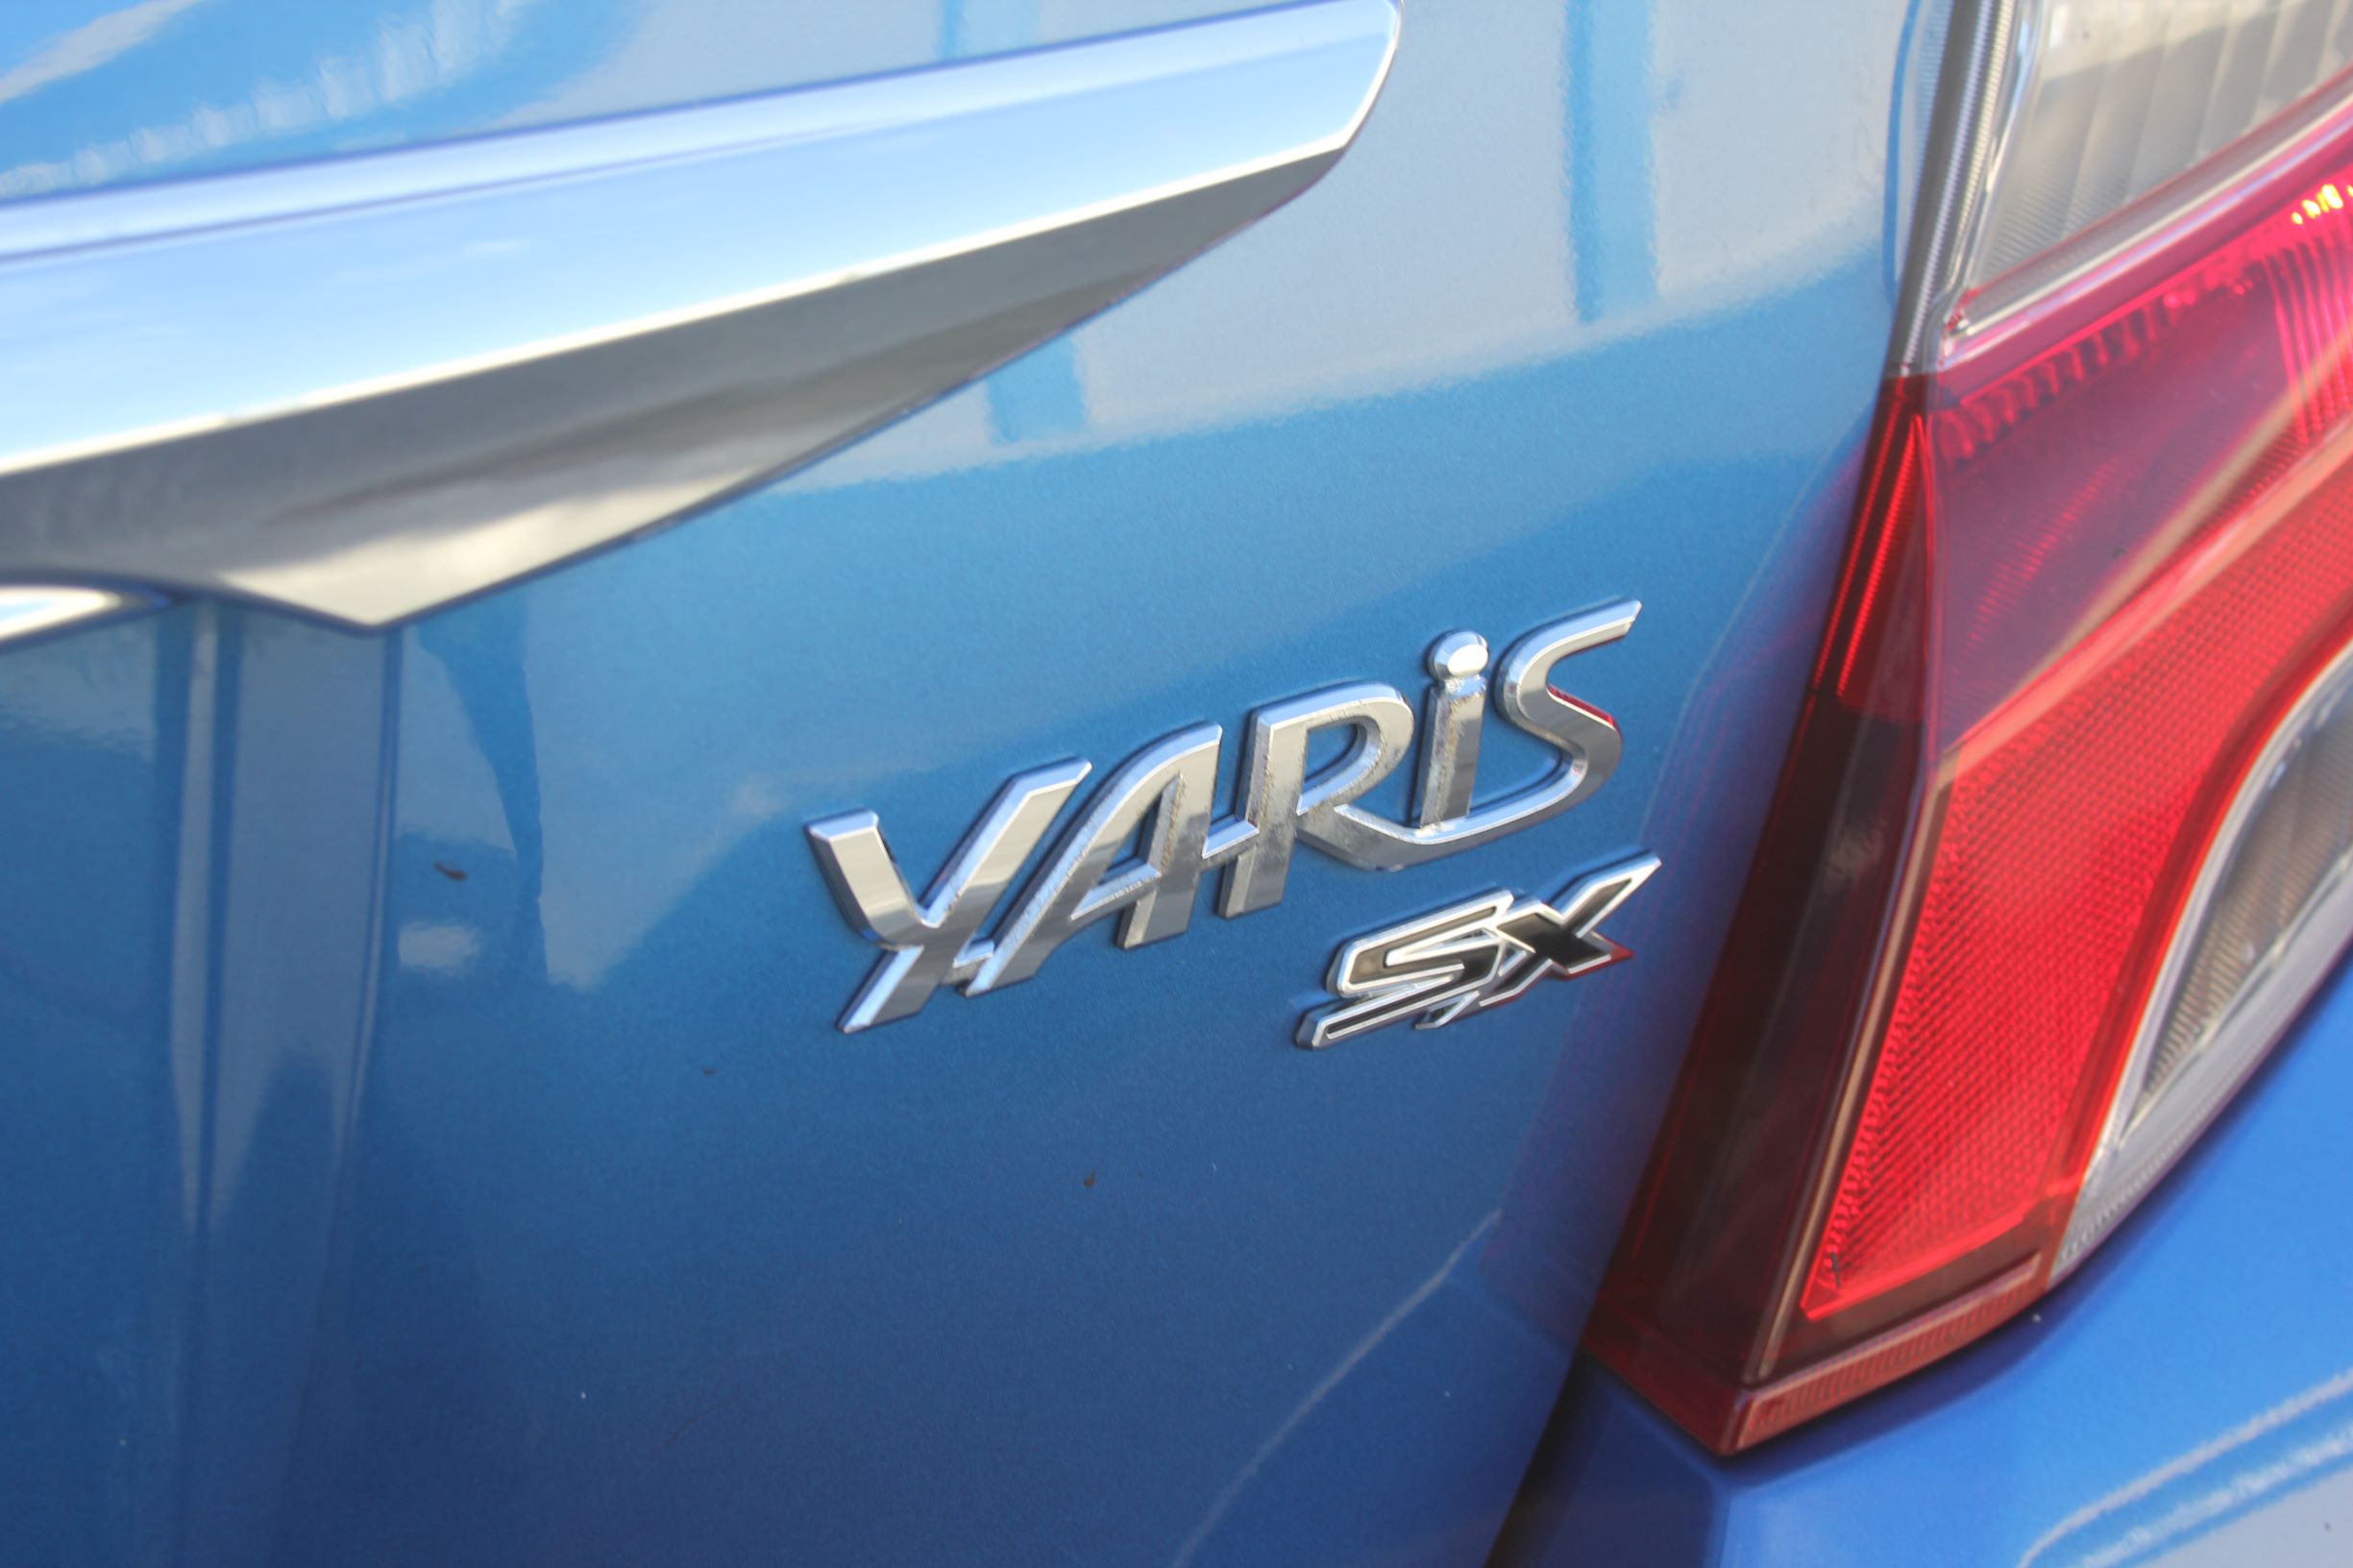 Toyota Yaris SX  2016 for sale in Auckland